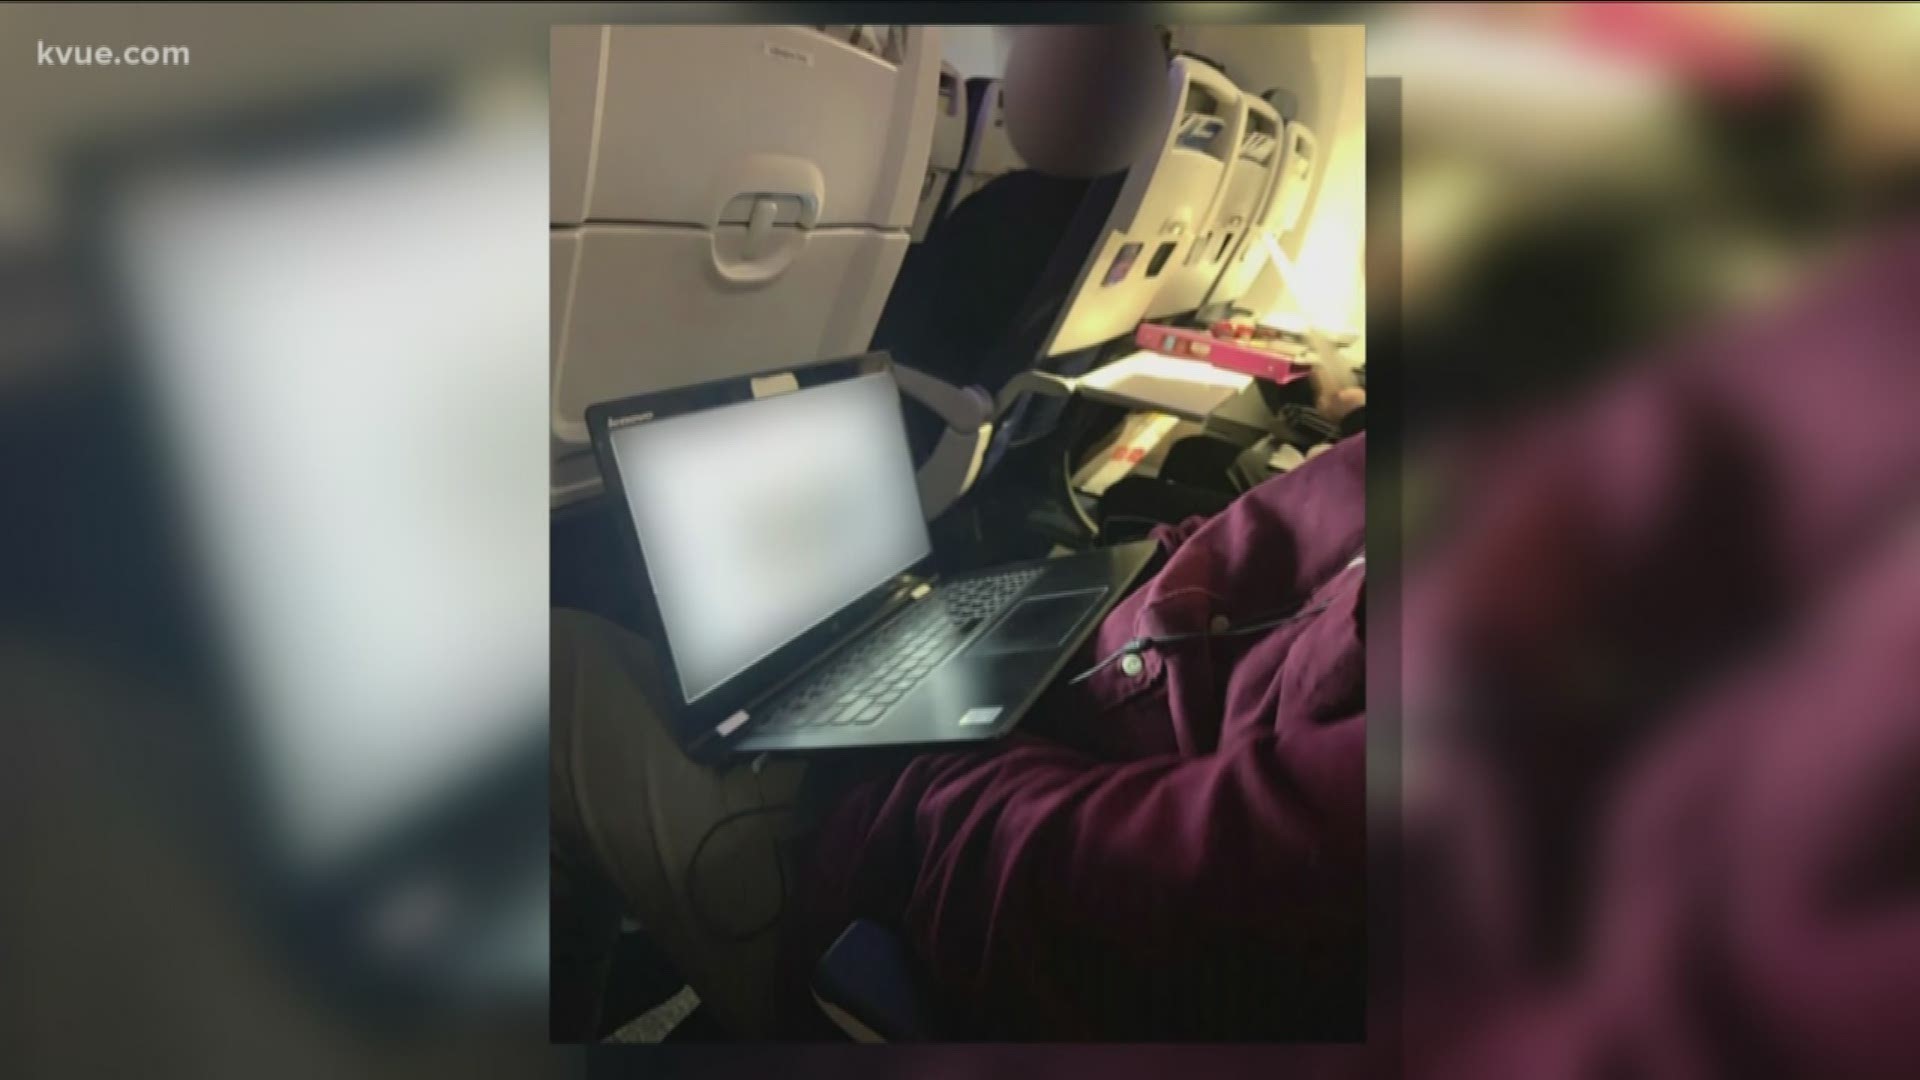 A woman claims a man touched himself inappropriately while sitting next to her on a flight back to Austin.